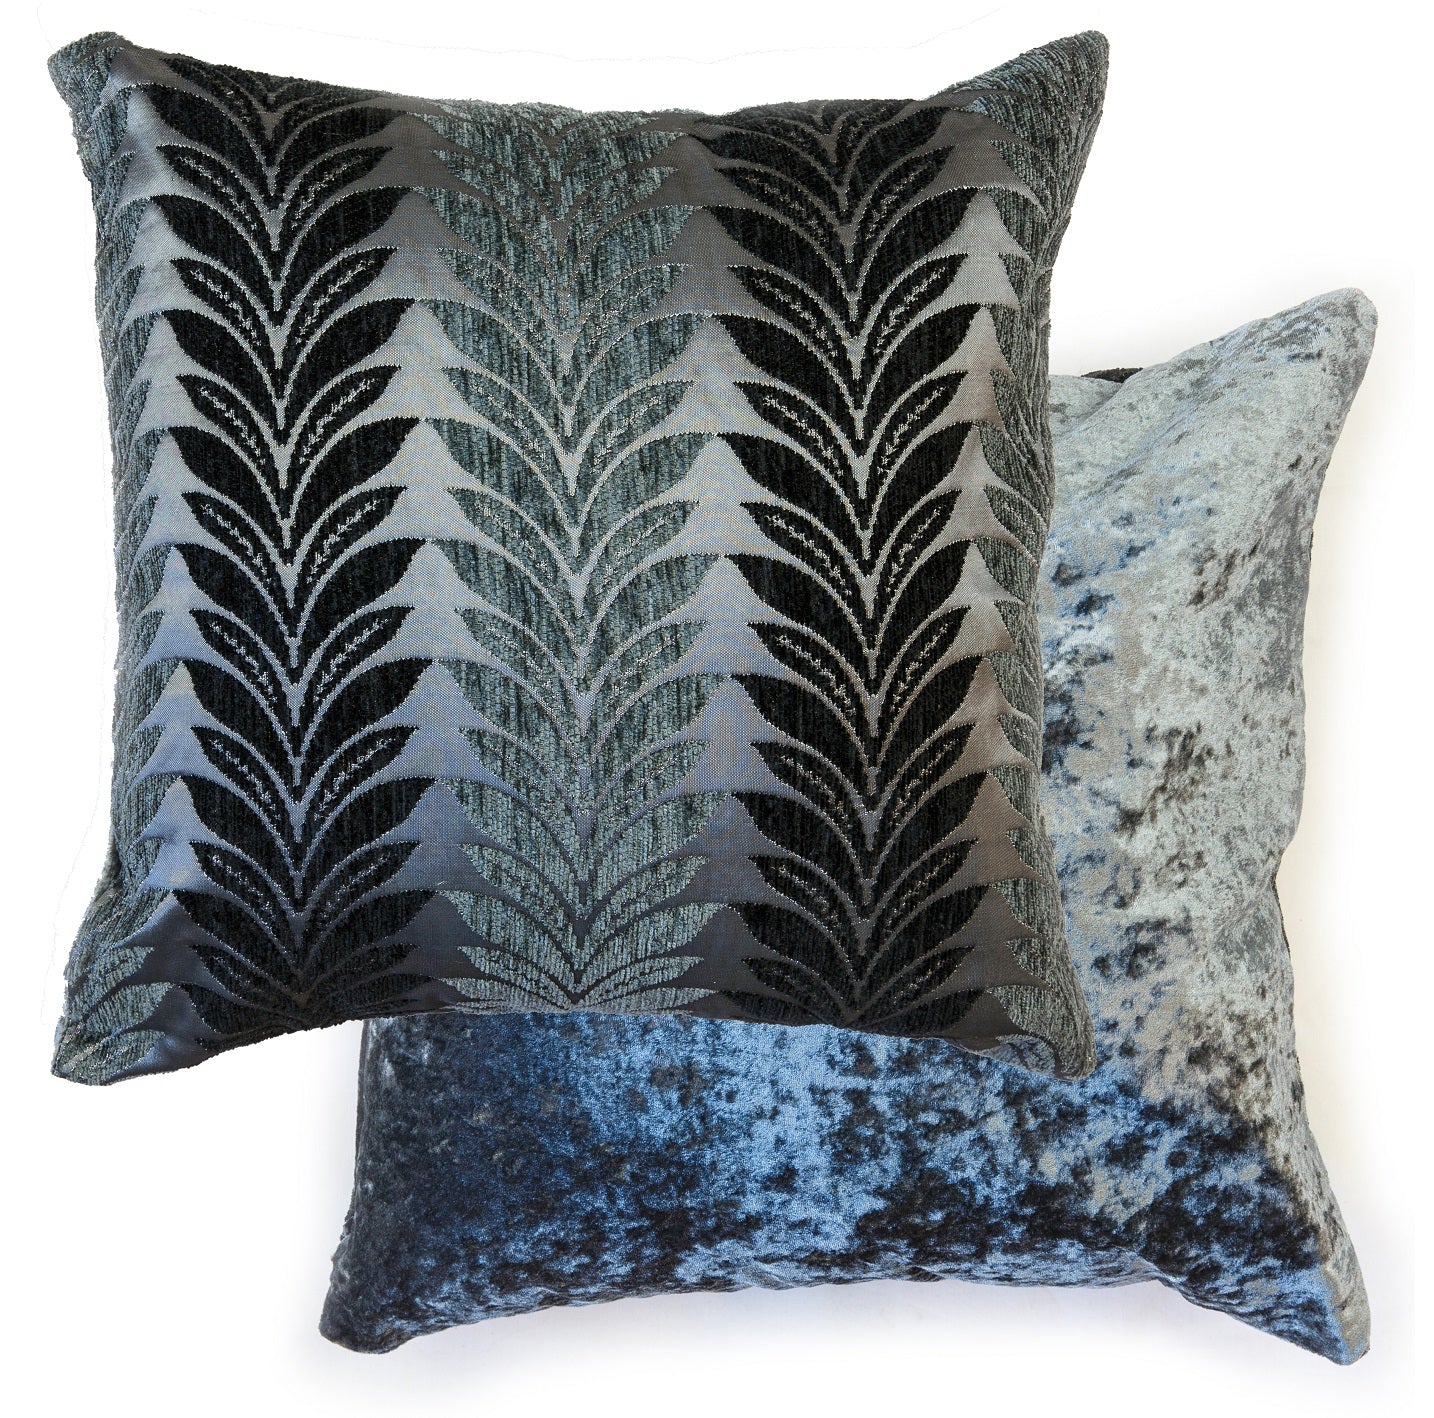 Crushed Velvet Leaves Cushion Cover Charcoal Grey